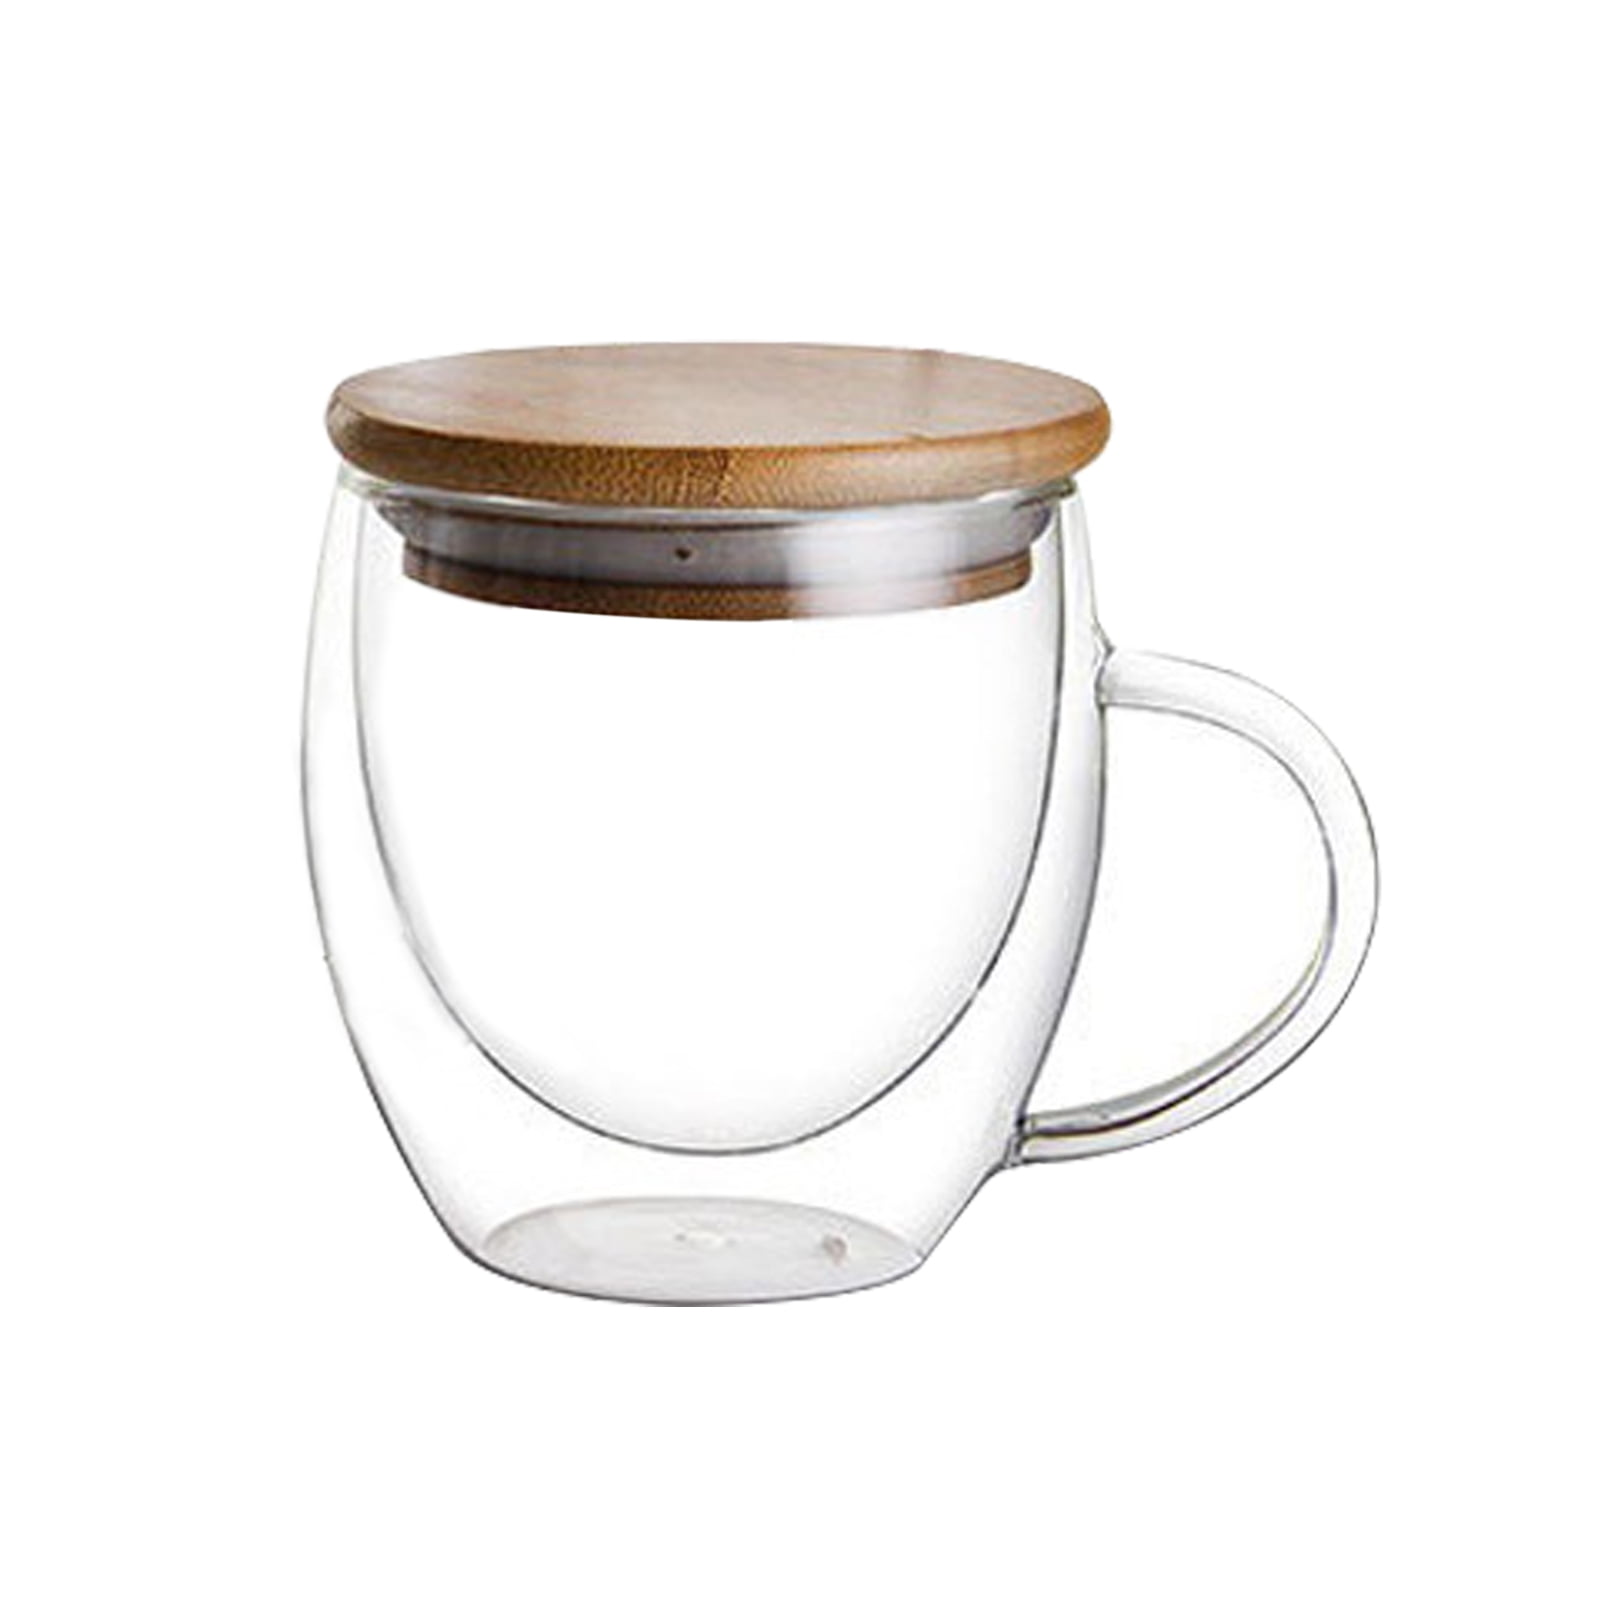 2pcs/420ml Double Wall Glass Insulated Coffee Cup With Handle, Transparent  Coffee And Tea Mug, Perfect For Cappuccino, Latte, Tea, Juice, Ideal For  Christmas, Halloween, Home Gathering, Birthday Party.